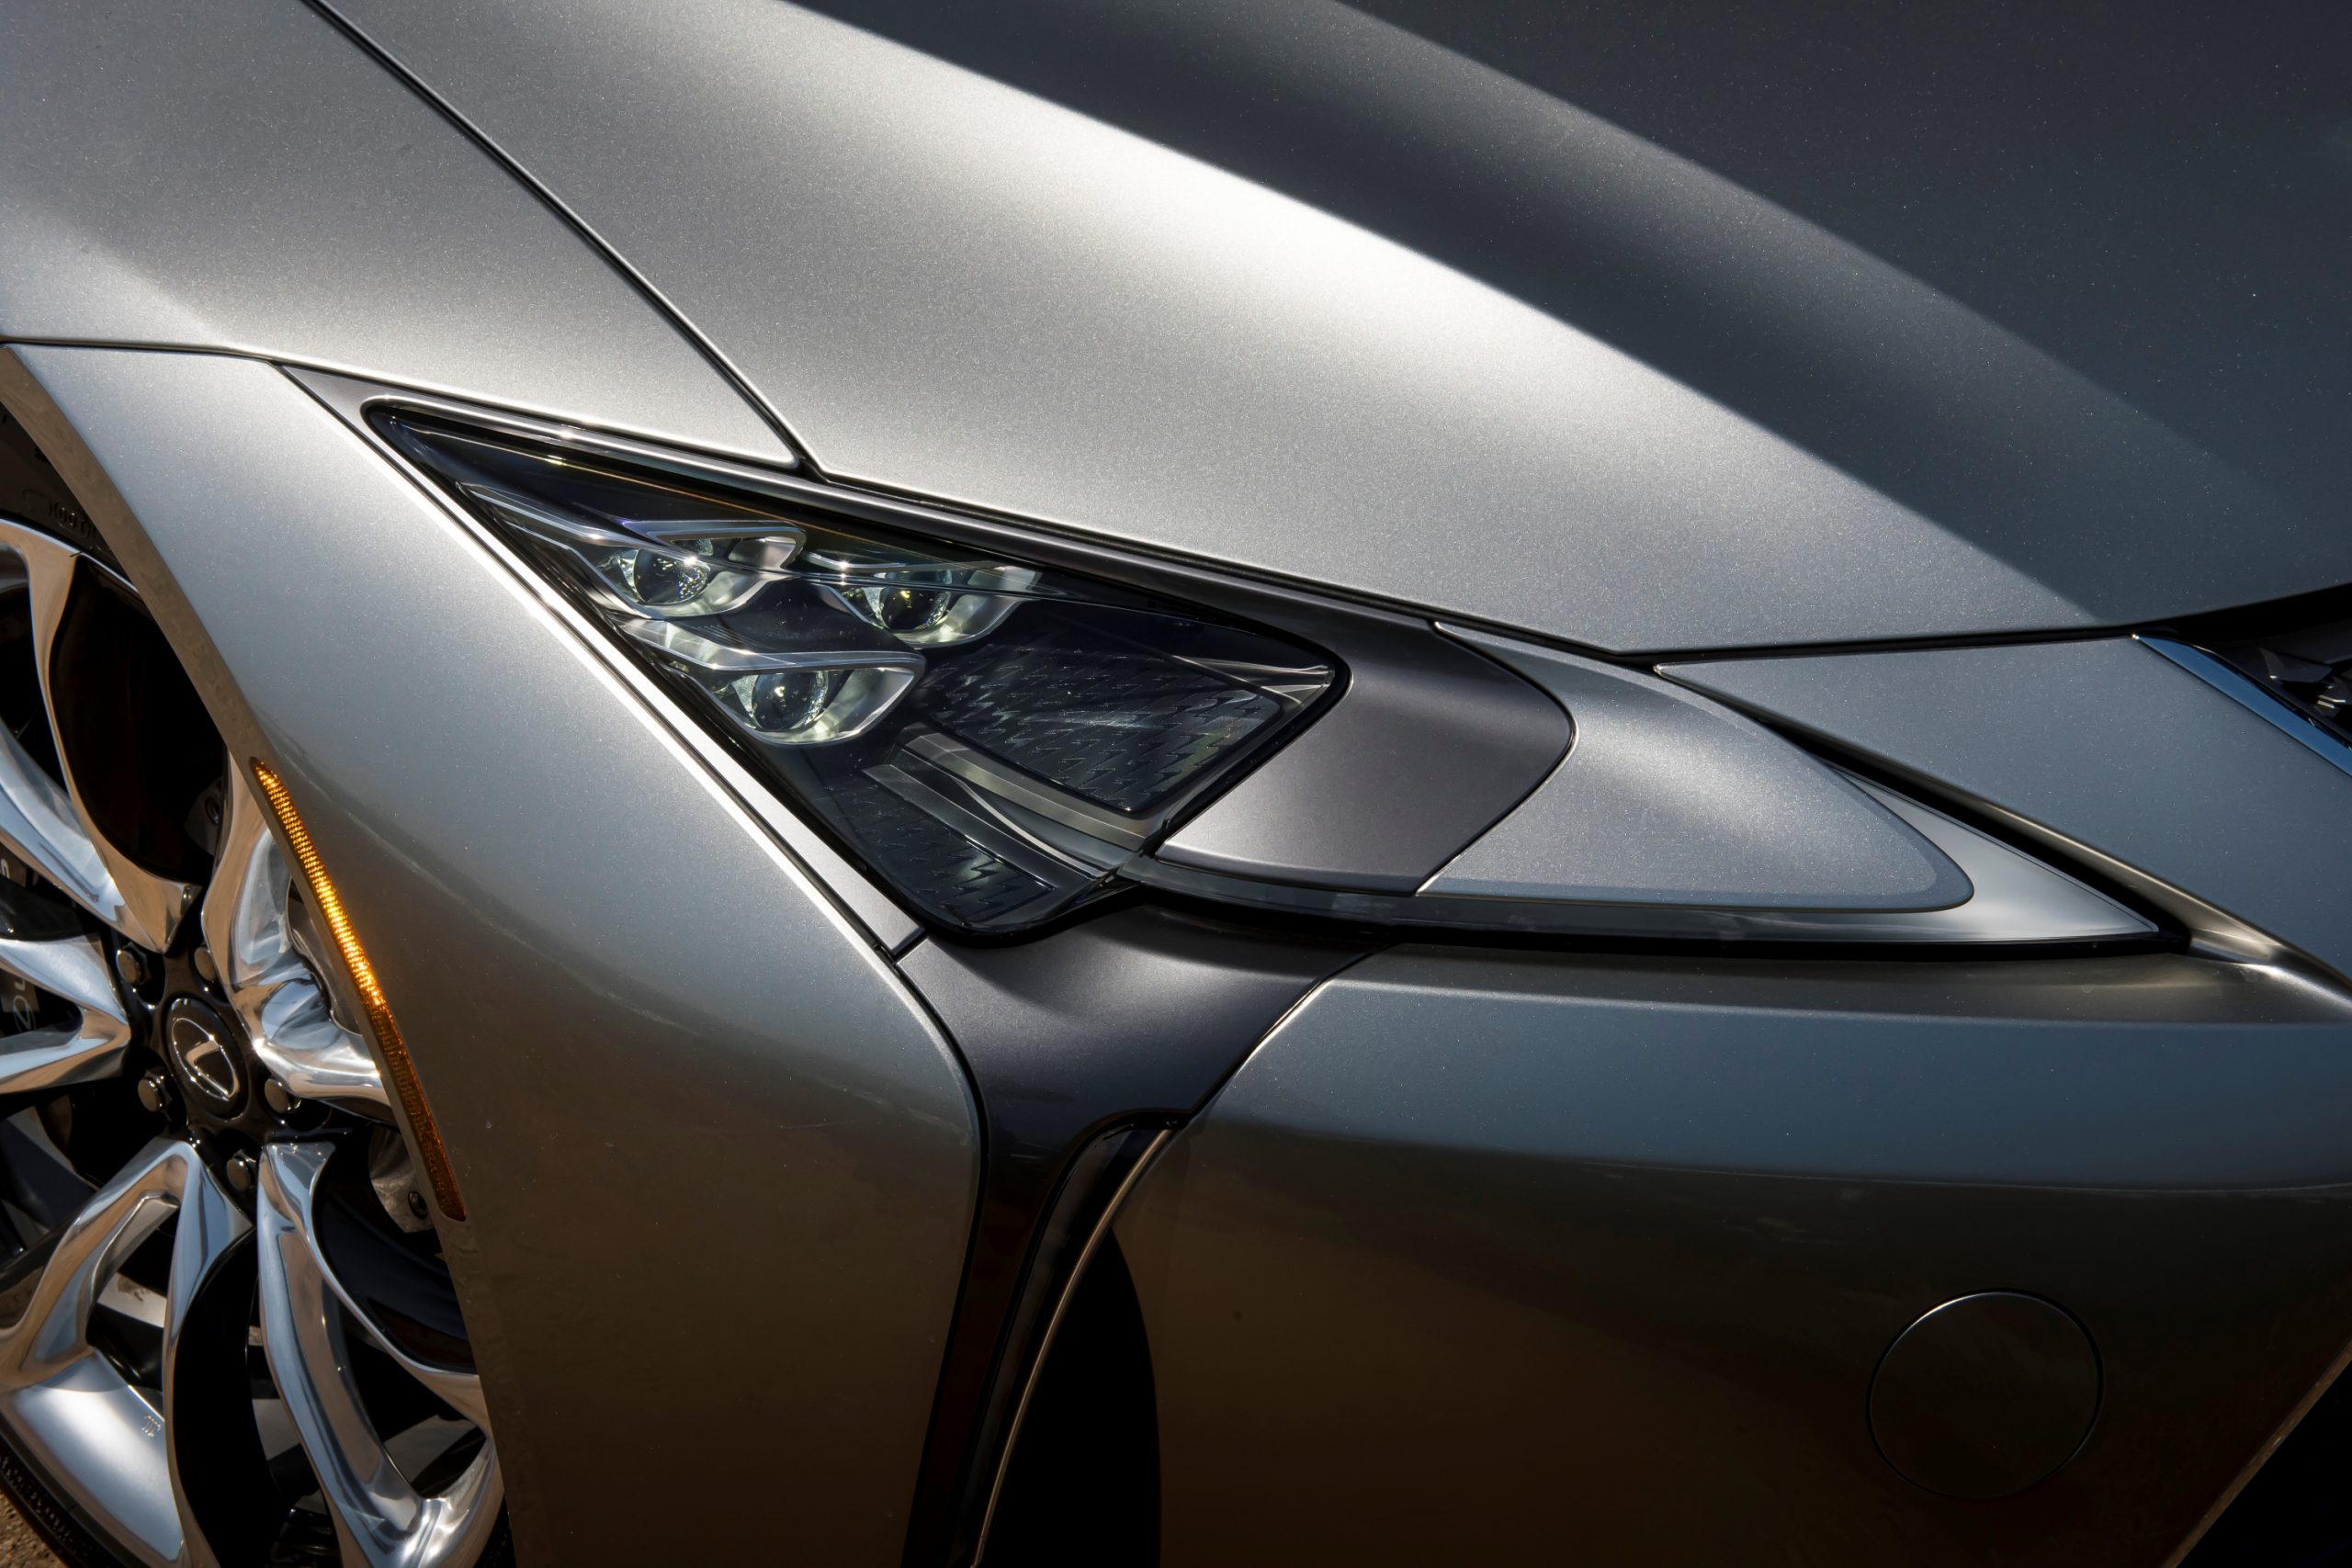 A close up view of the passenger headlight on a 2021 Lexus LC 500 Convertible